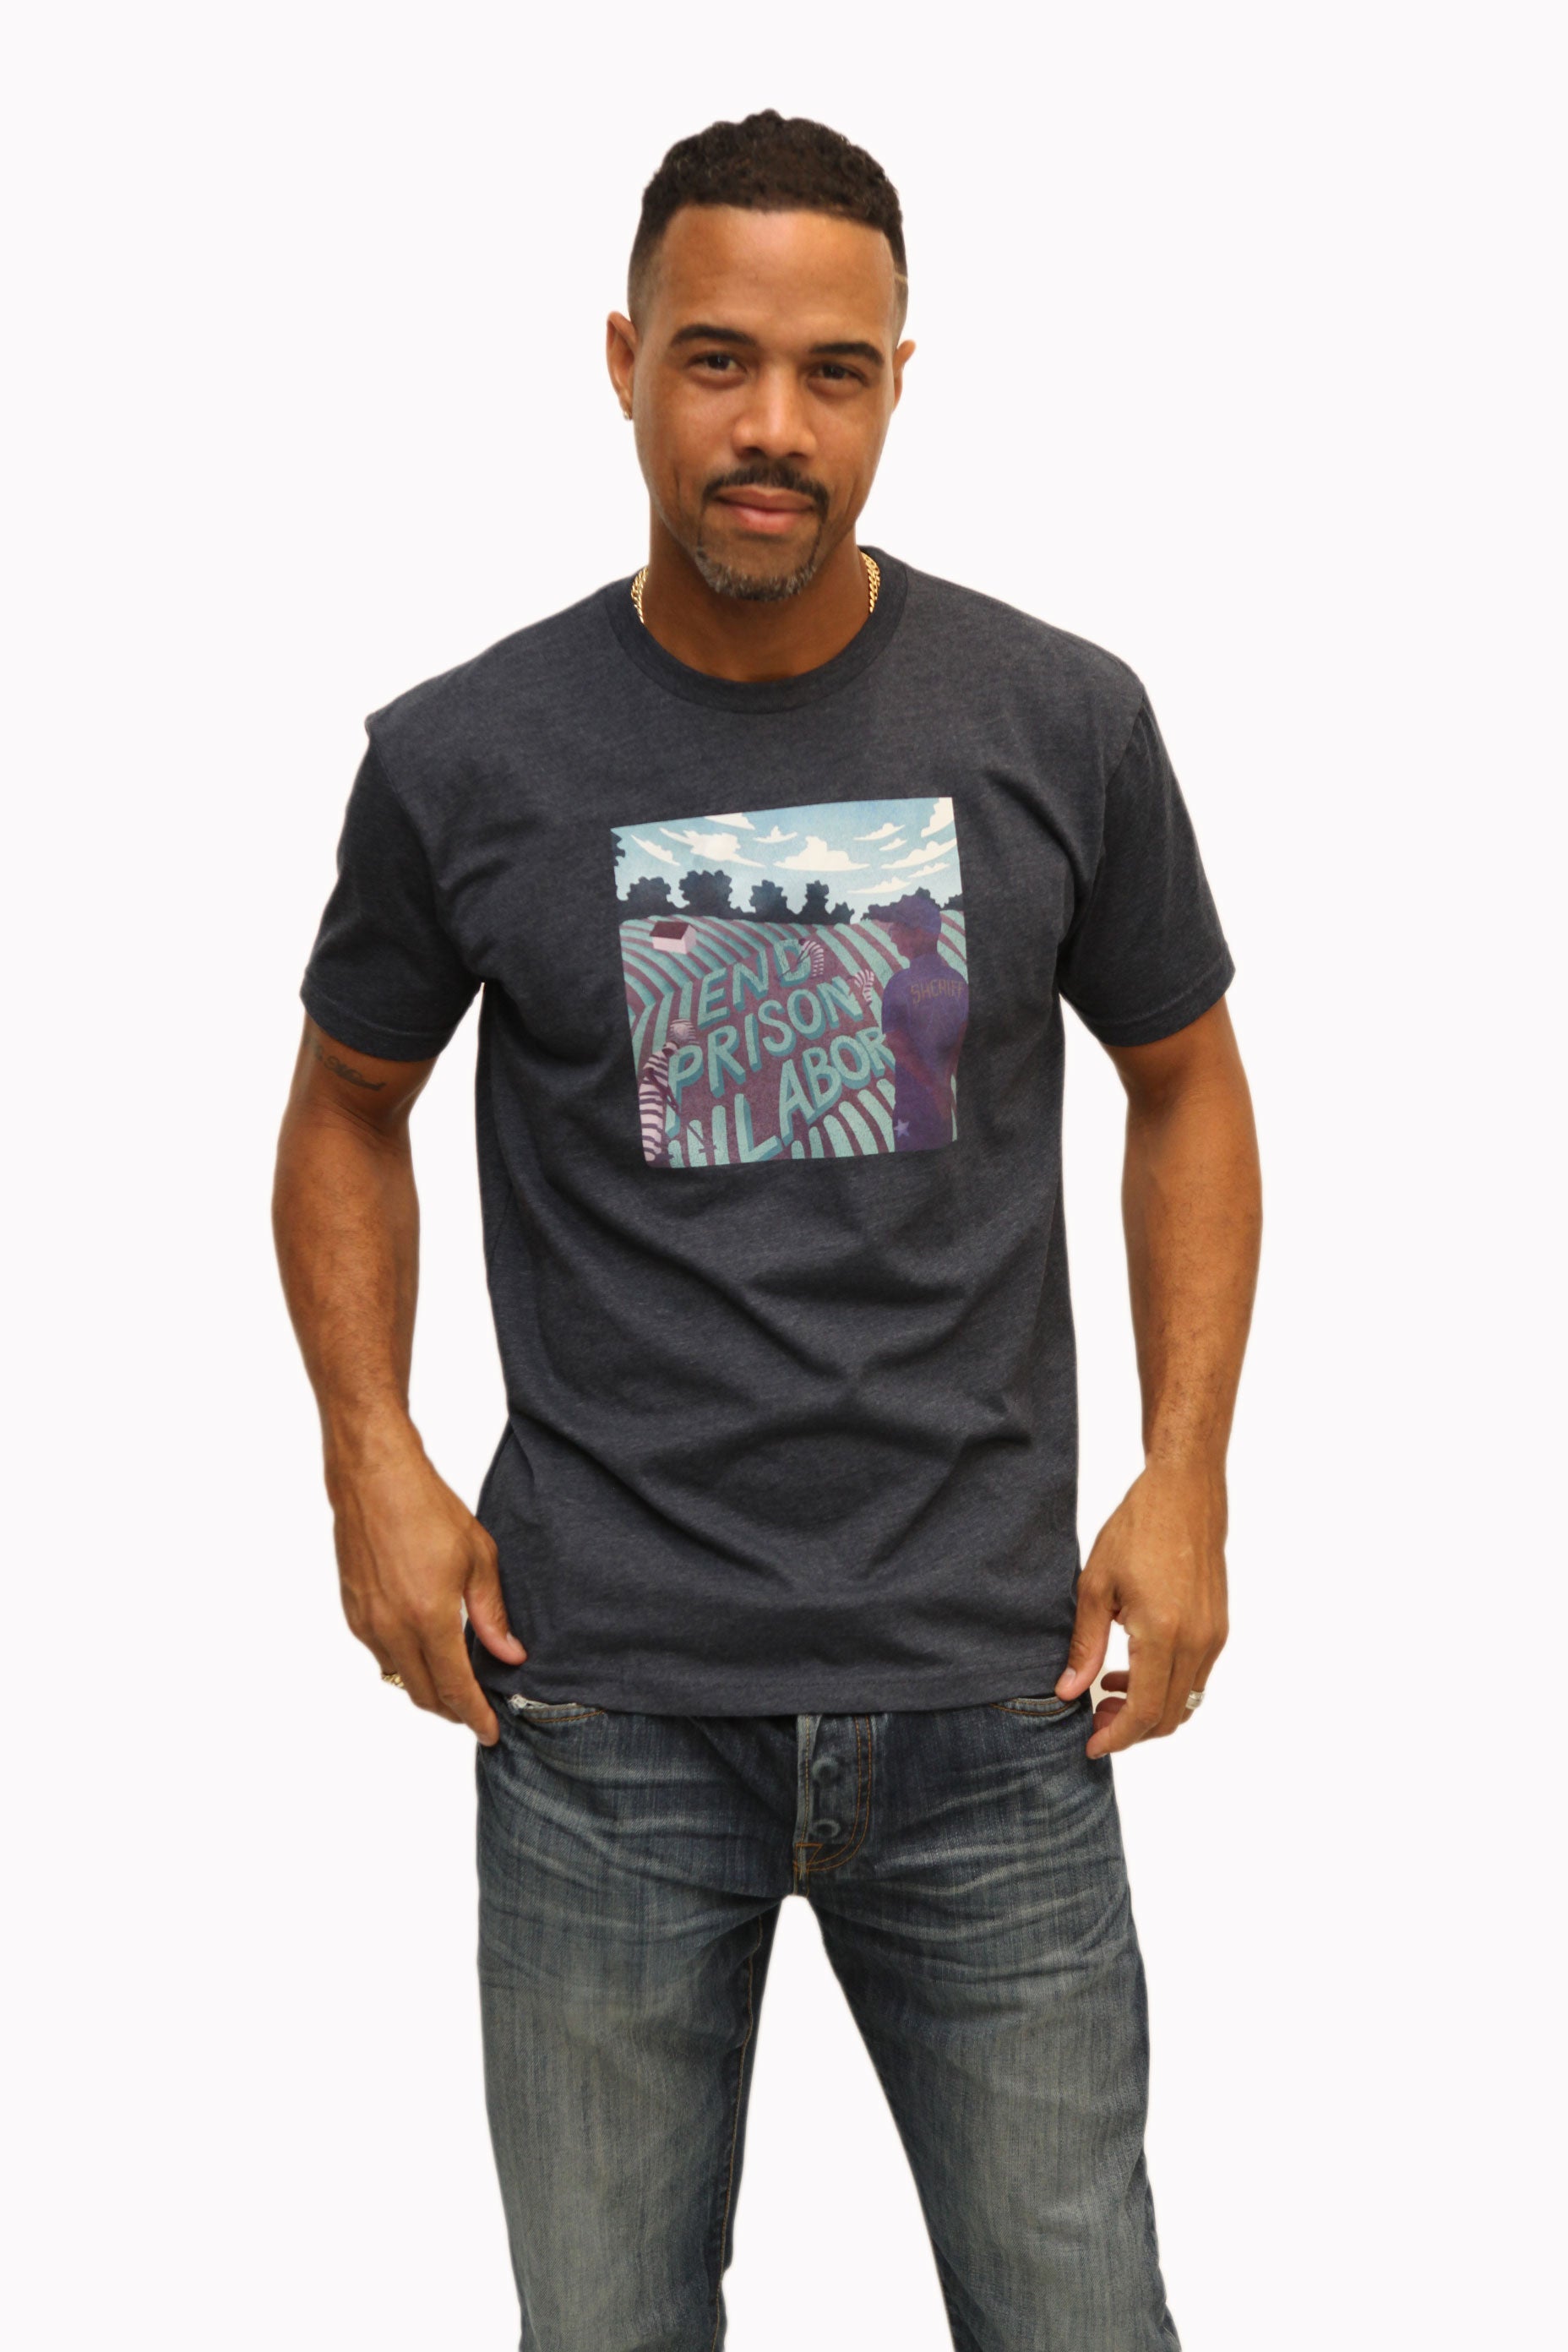 End Prison Labor Illustration Shirt in Navy - Trunk Series